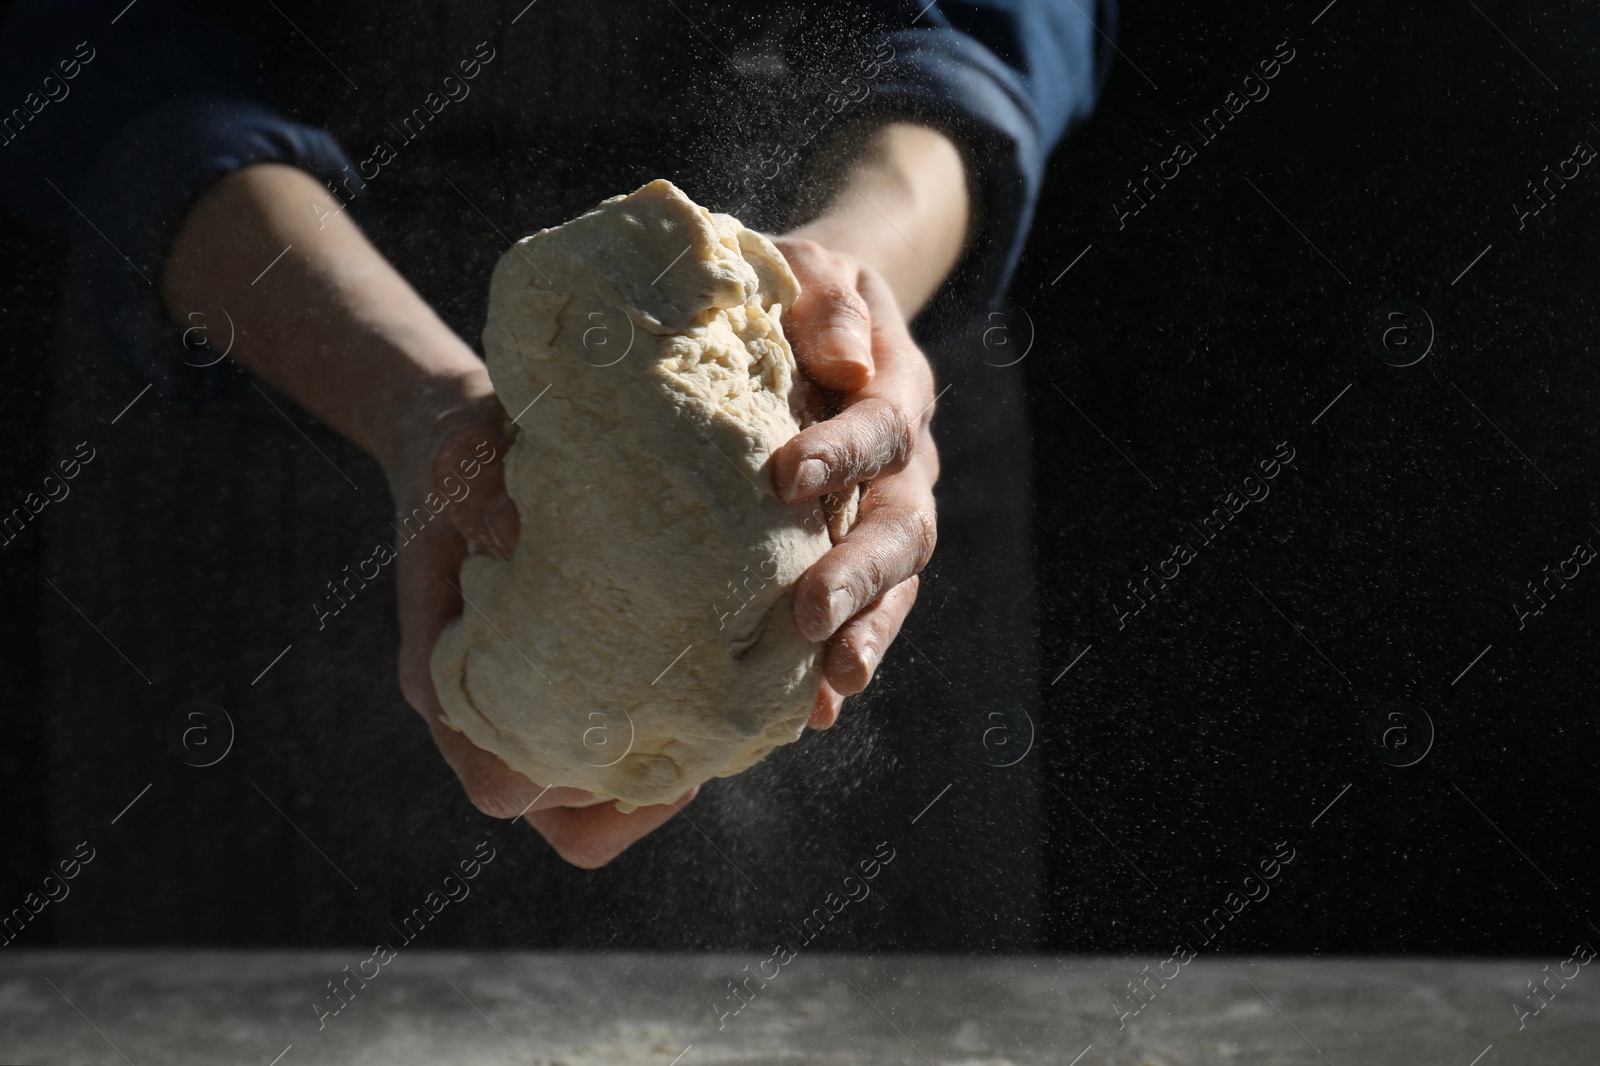 Photo of Making bread. Woman kneading dough at table on dark background, closeup. Space for text